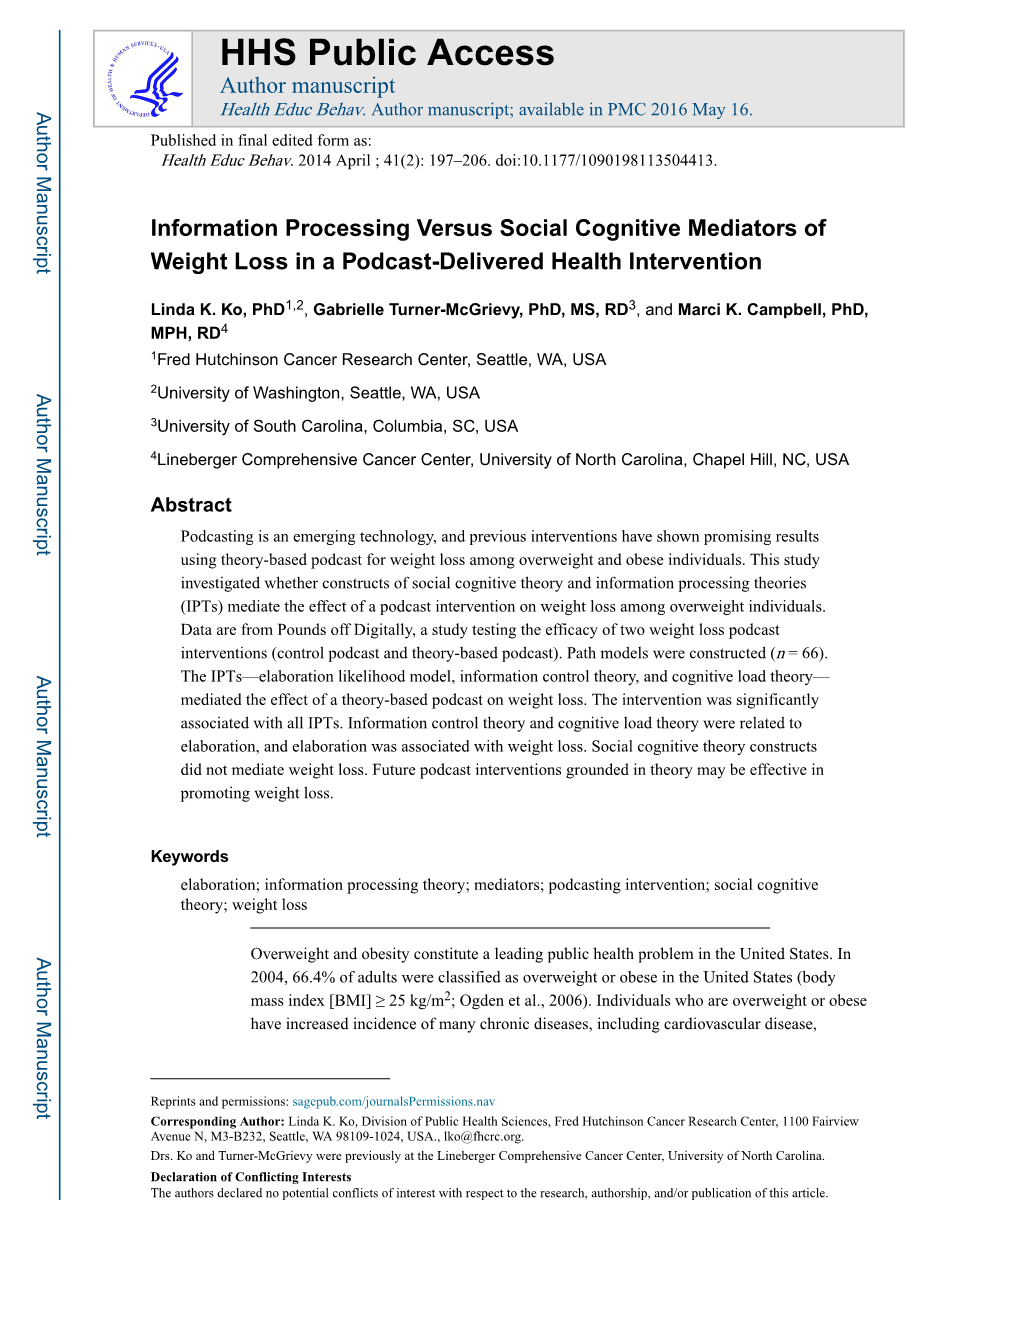 Information Processing Versus Social Cognitive Mediators of Weight Loss in a Podcast-Delivered Health Intervention